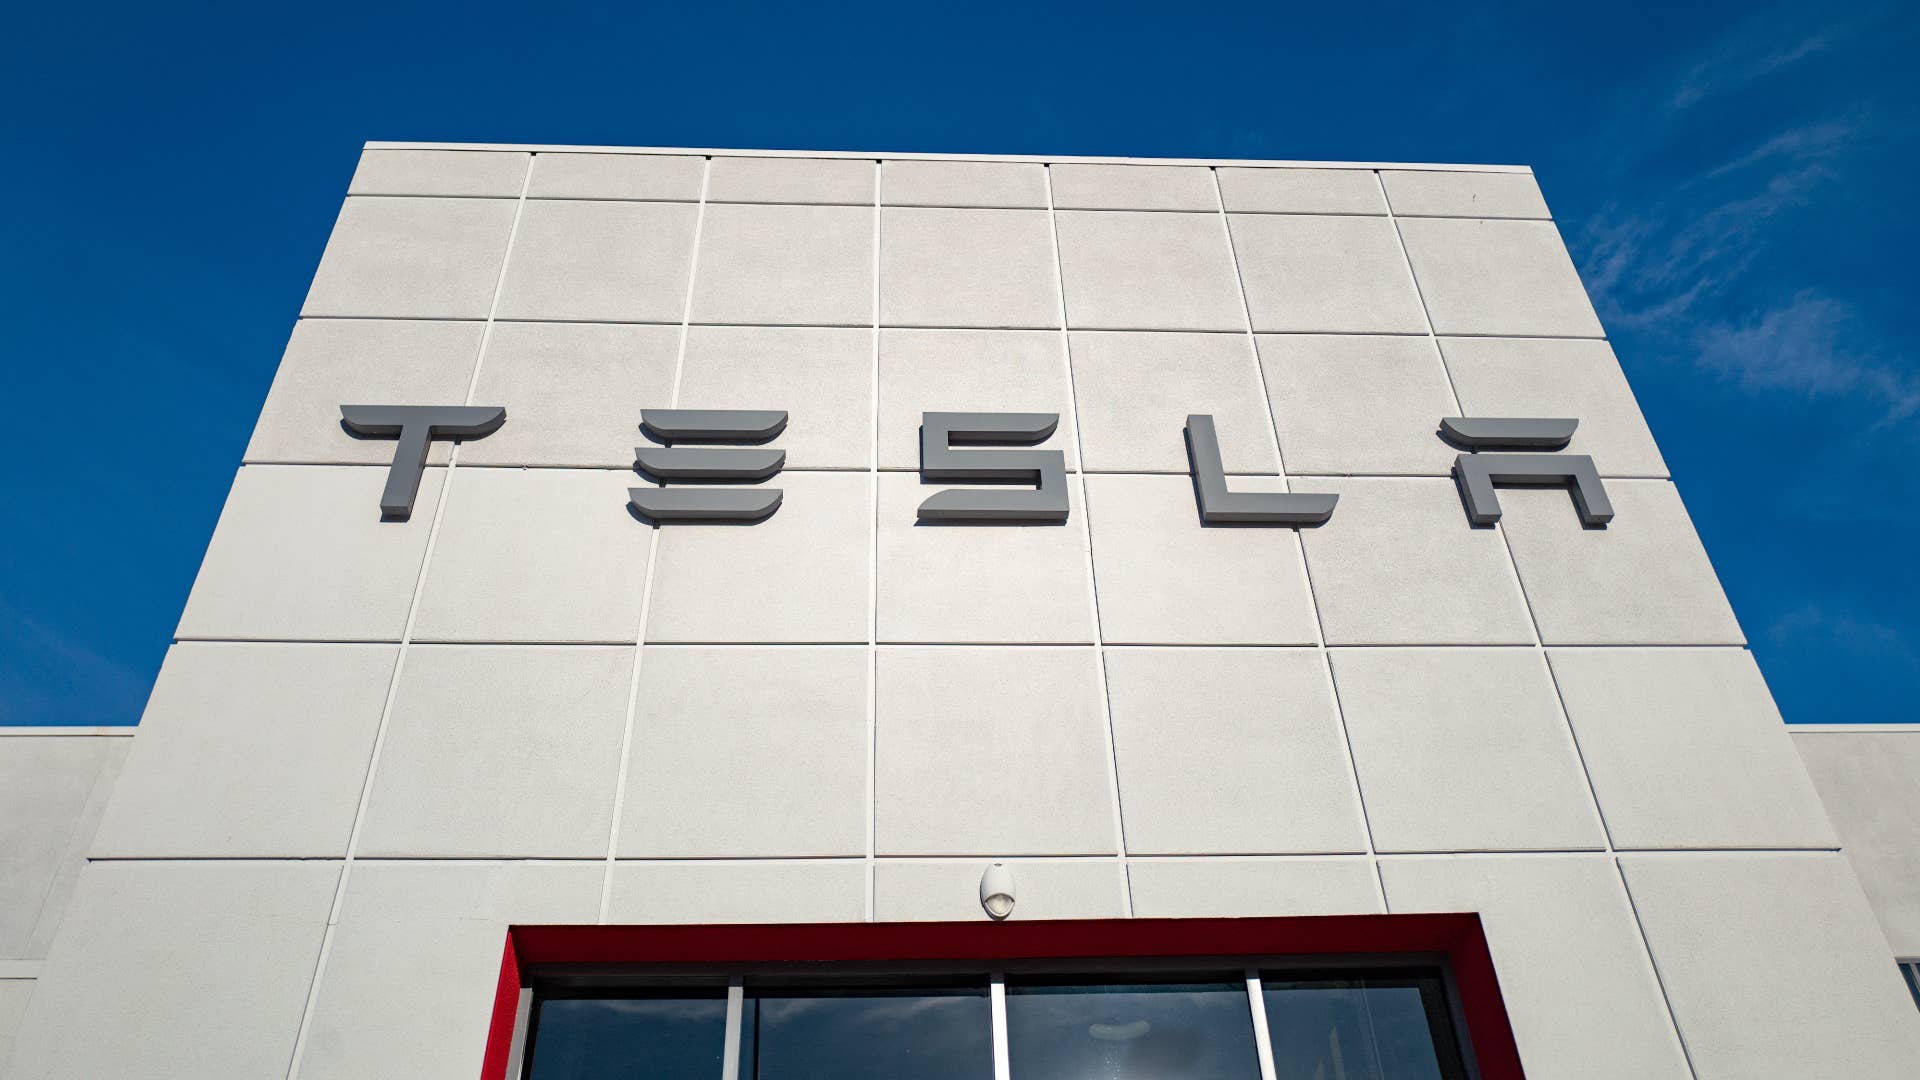 A logo for the Tesla company is pictured